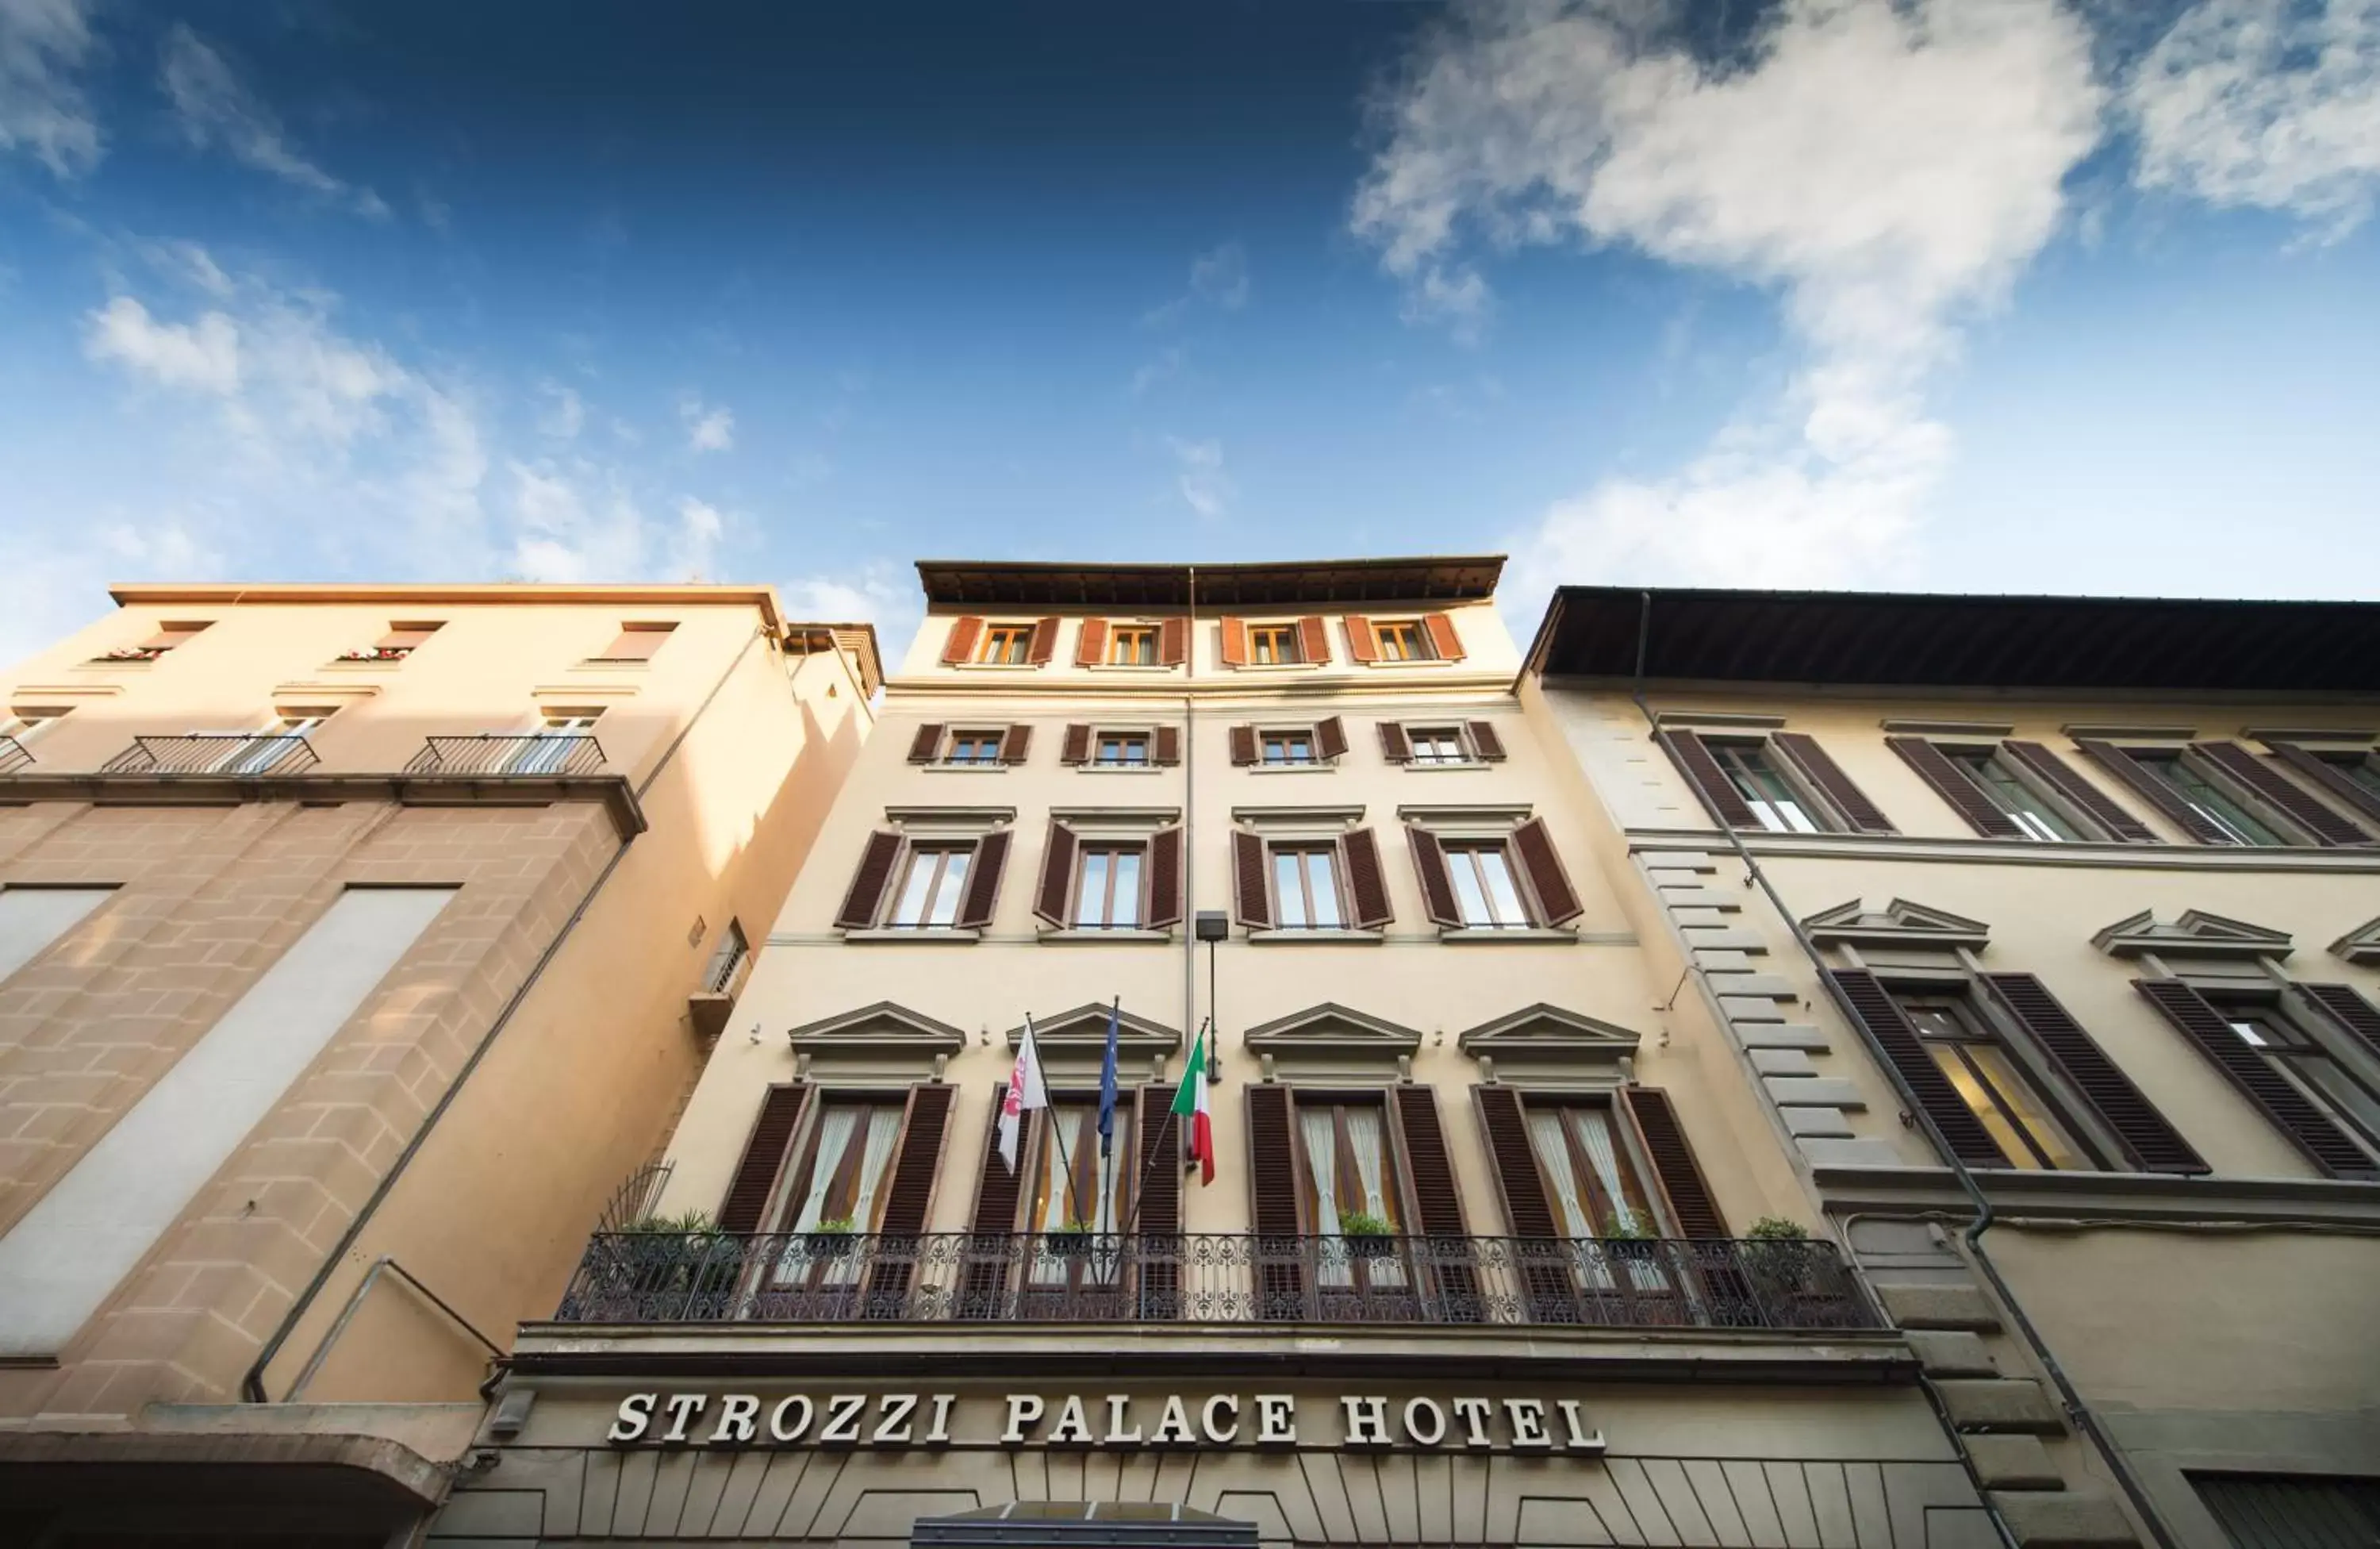 Facade/entrance in Strozzi Palace Hotel